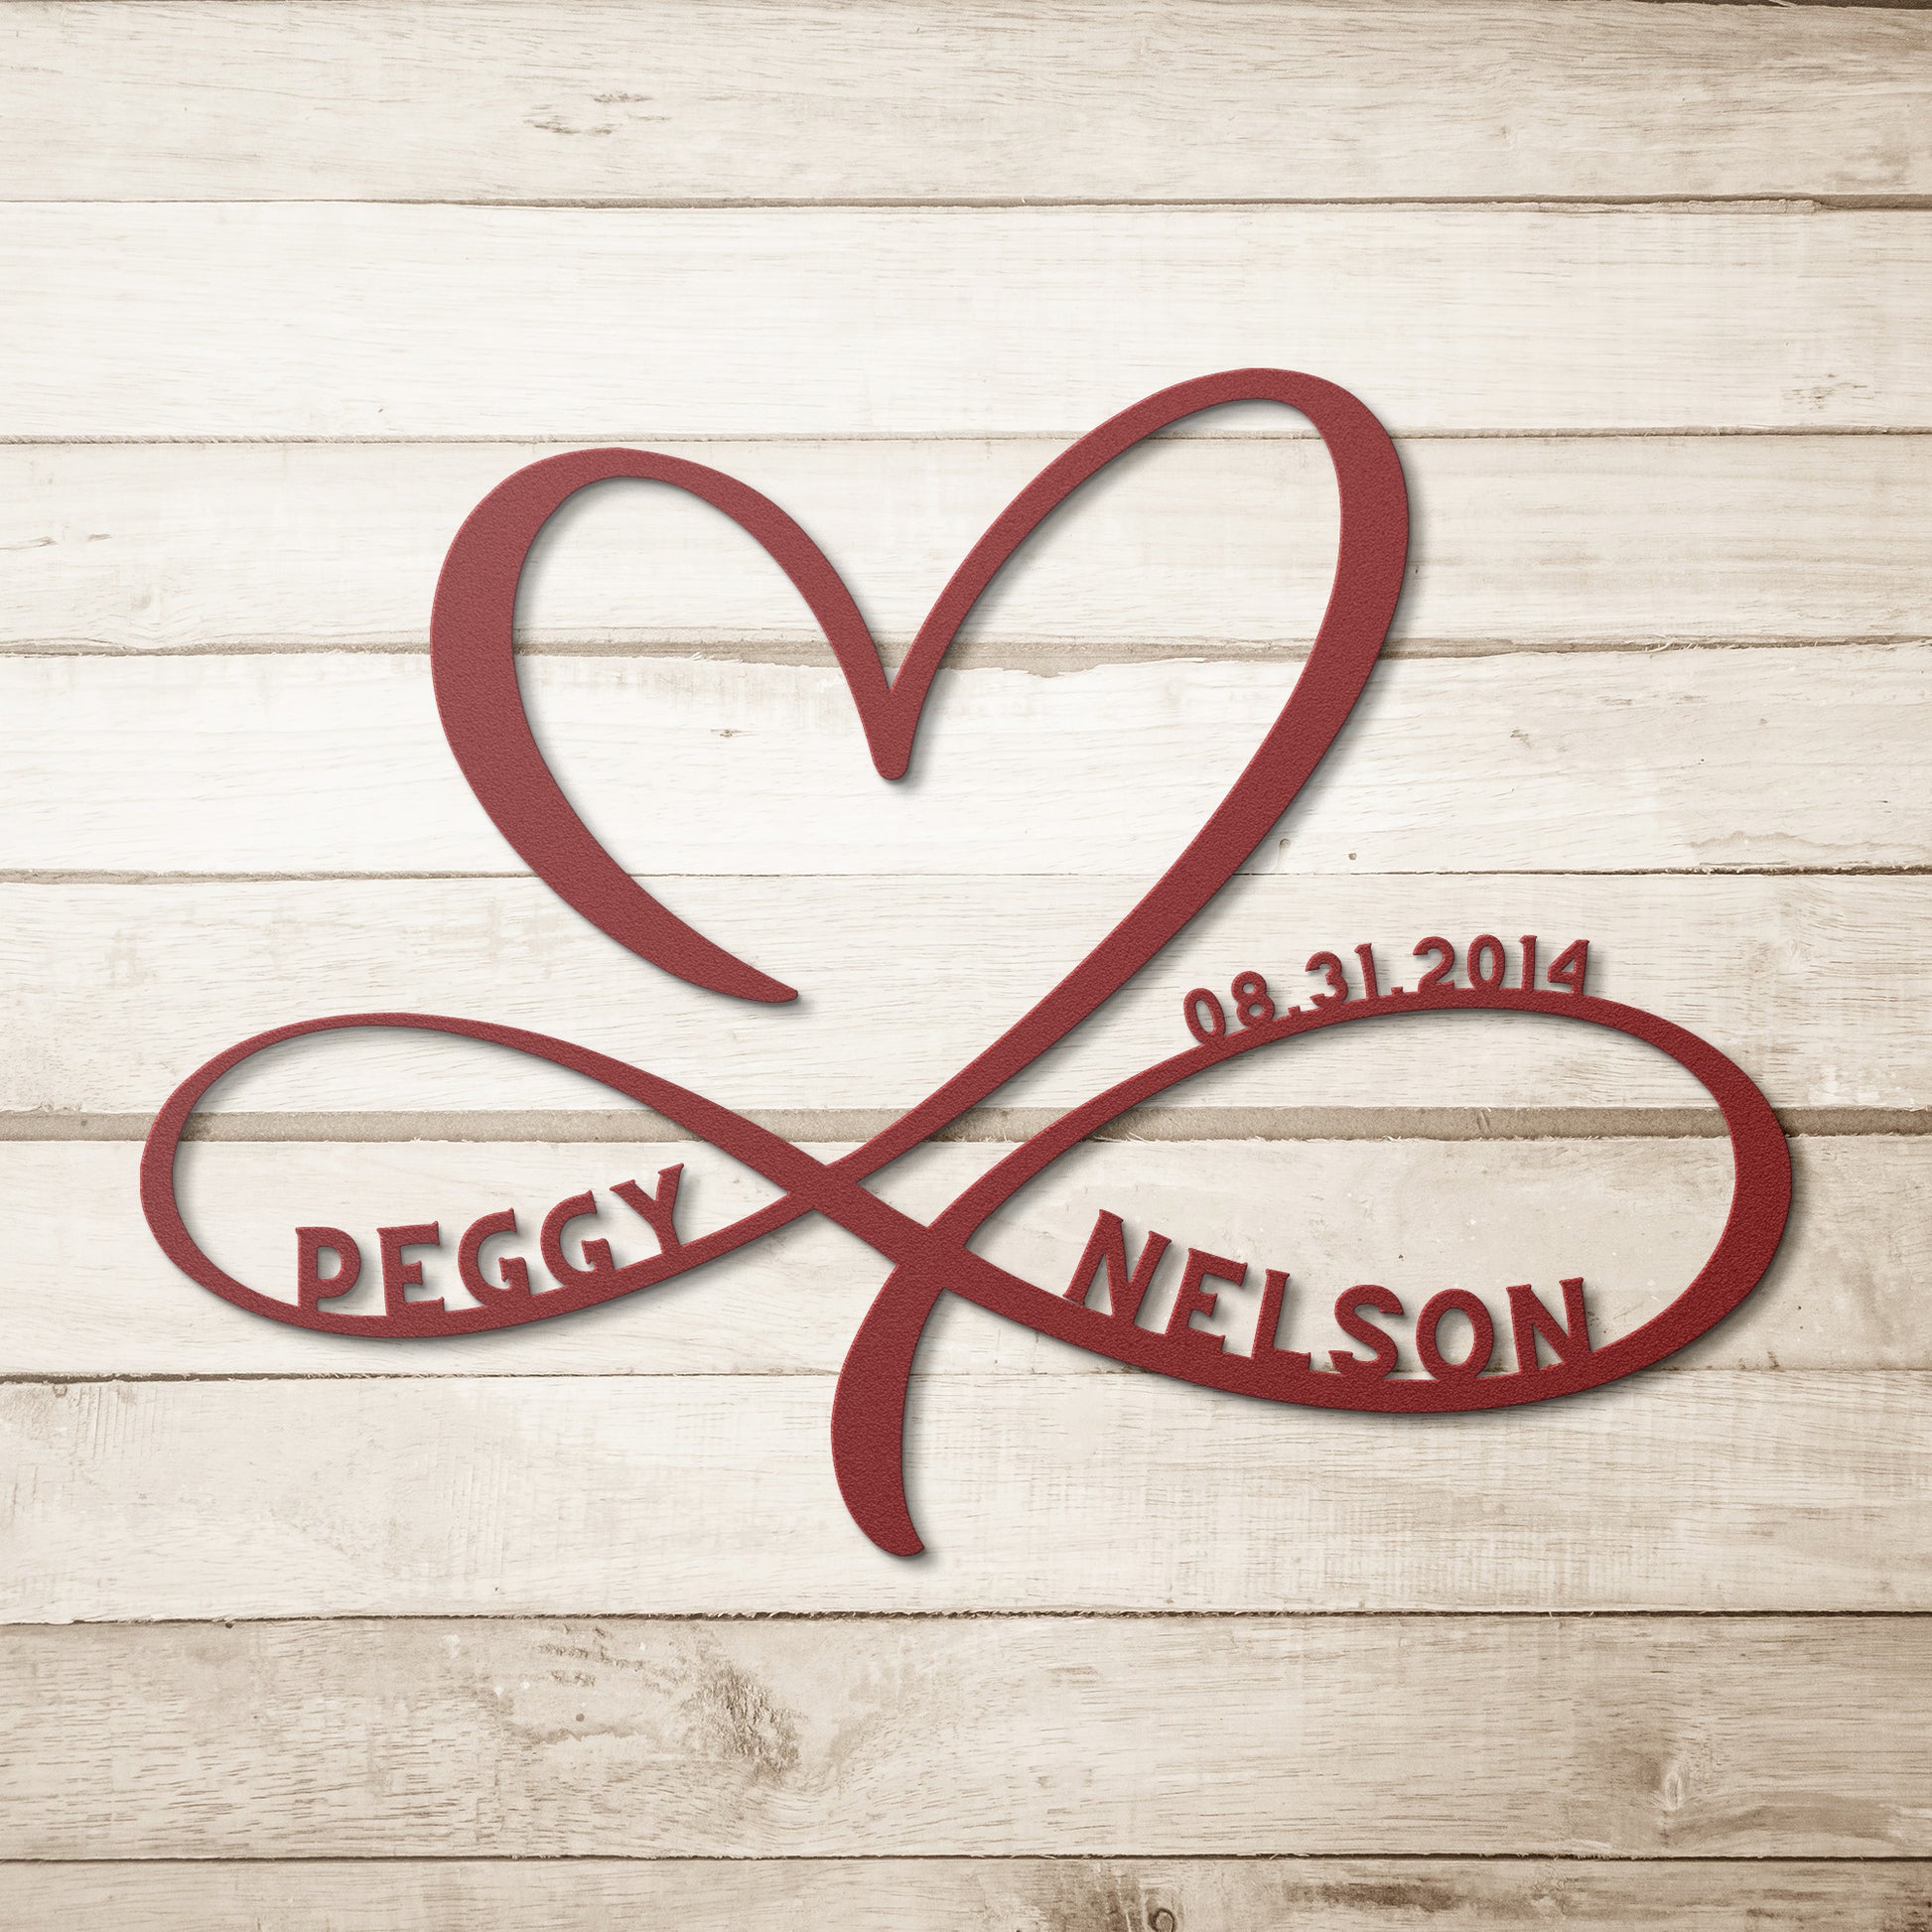 A Personalized Infinity Love Heart Metal Art Sign made by teelaunch, made of 18 gauge steel, powder coated, engraved with the names of the bride and groom.